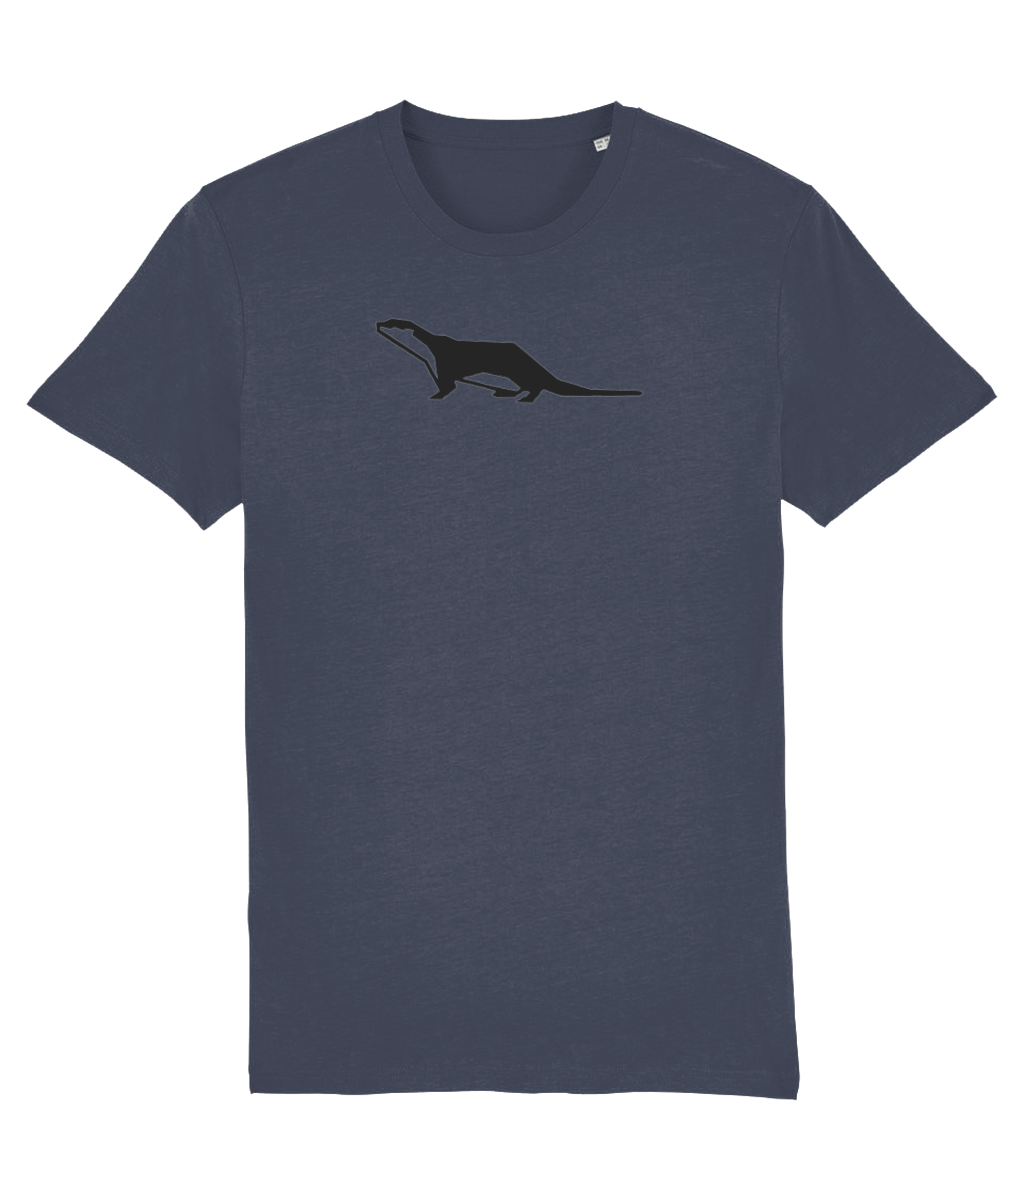 Otter Gay Organic Cotton T-Shirt in India Ink Grey